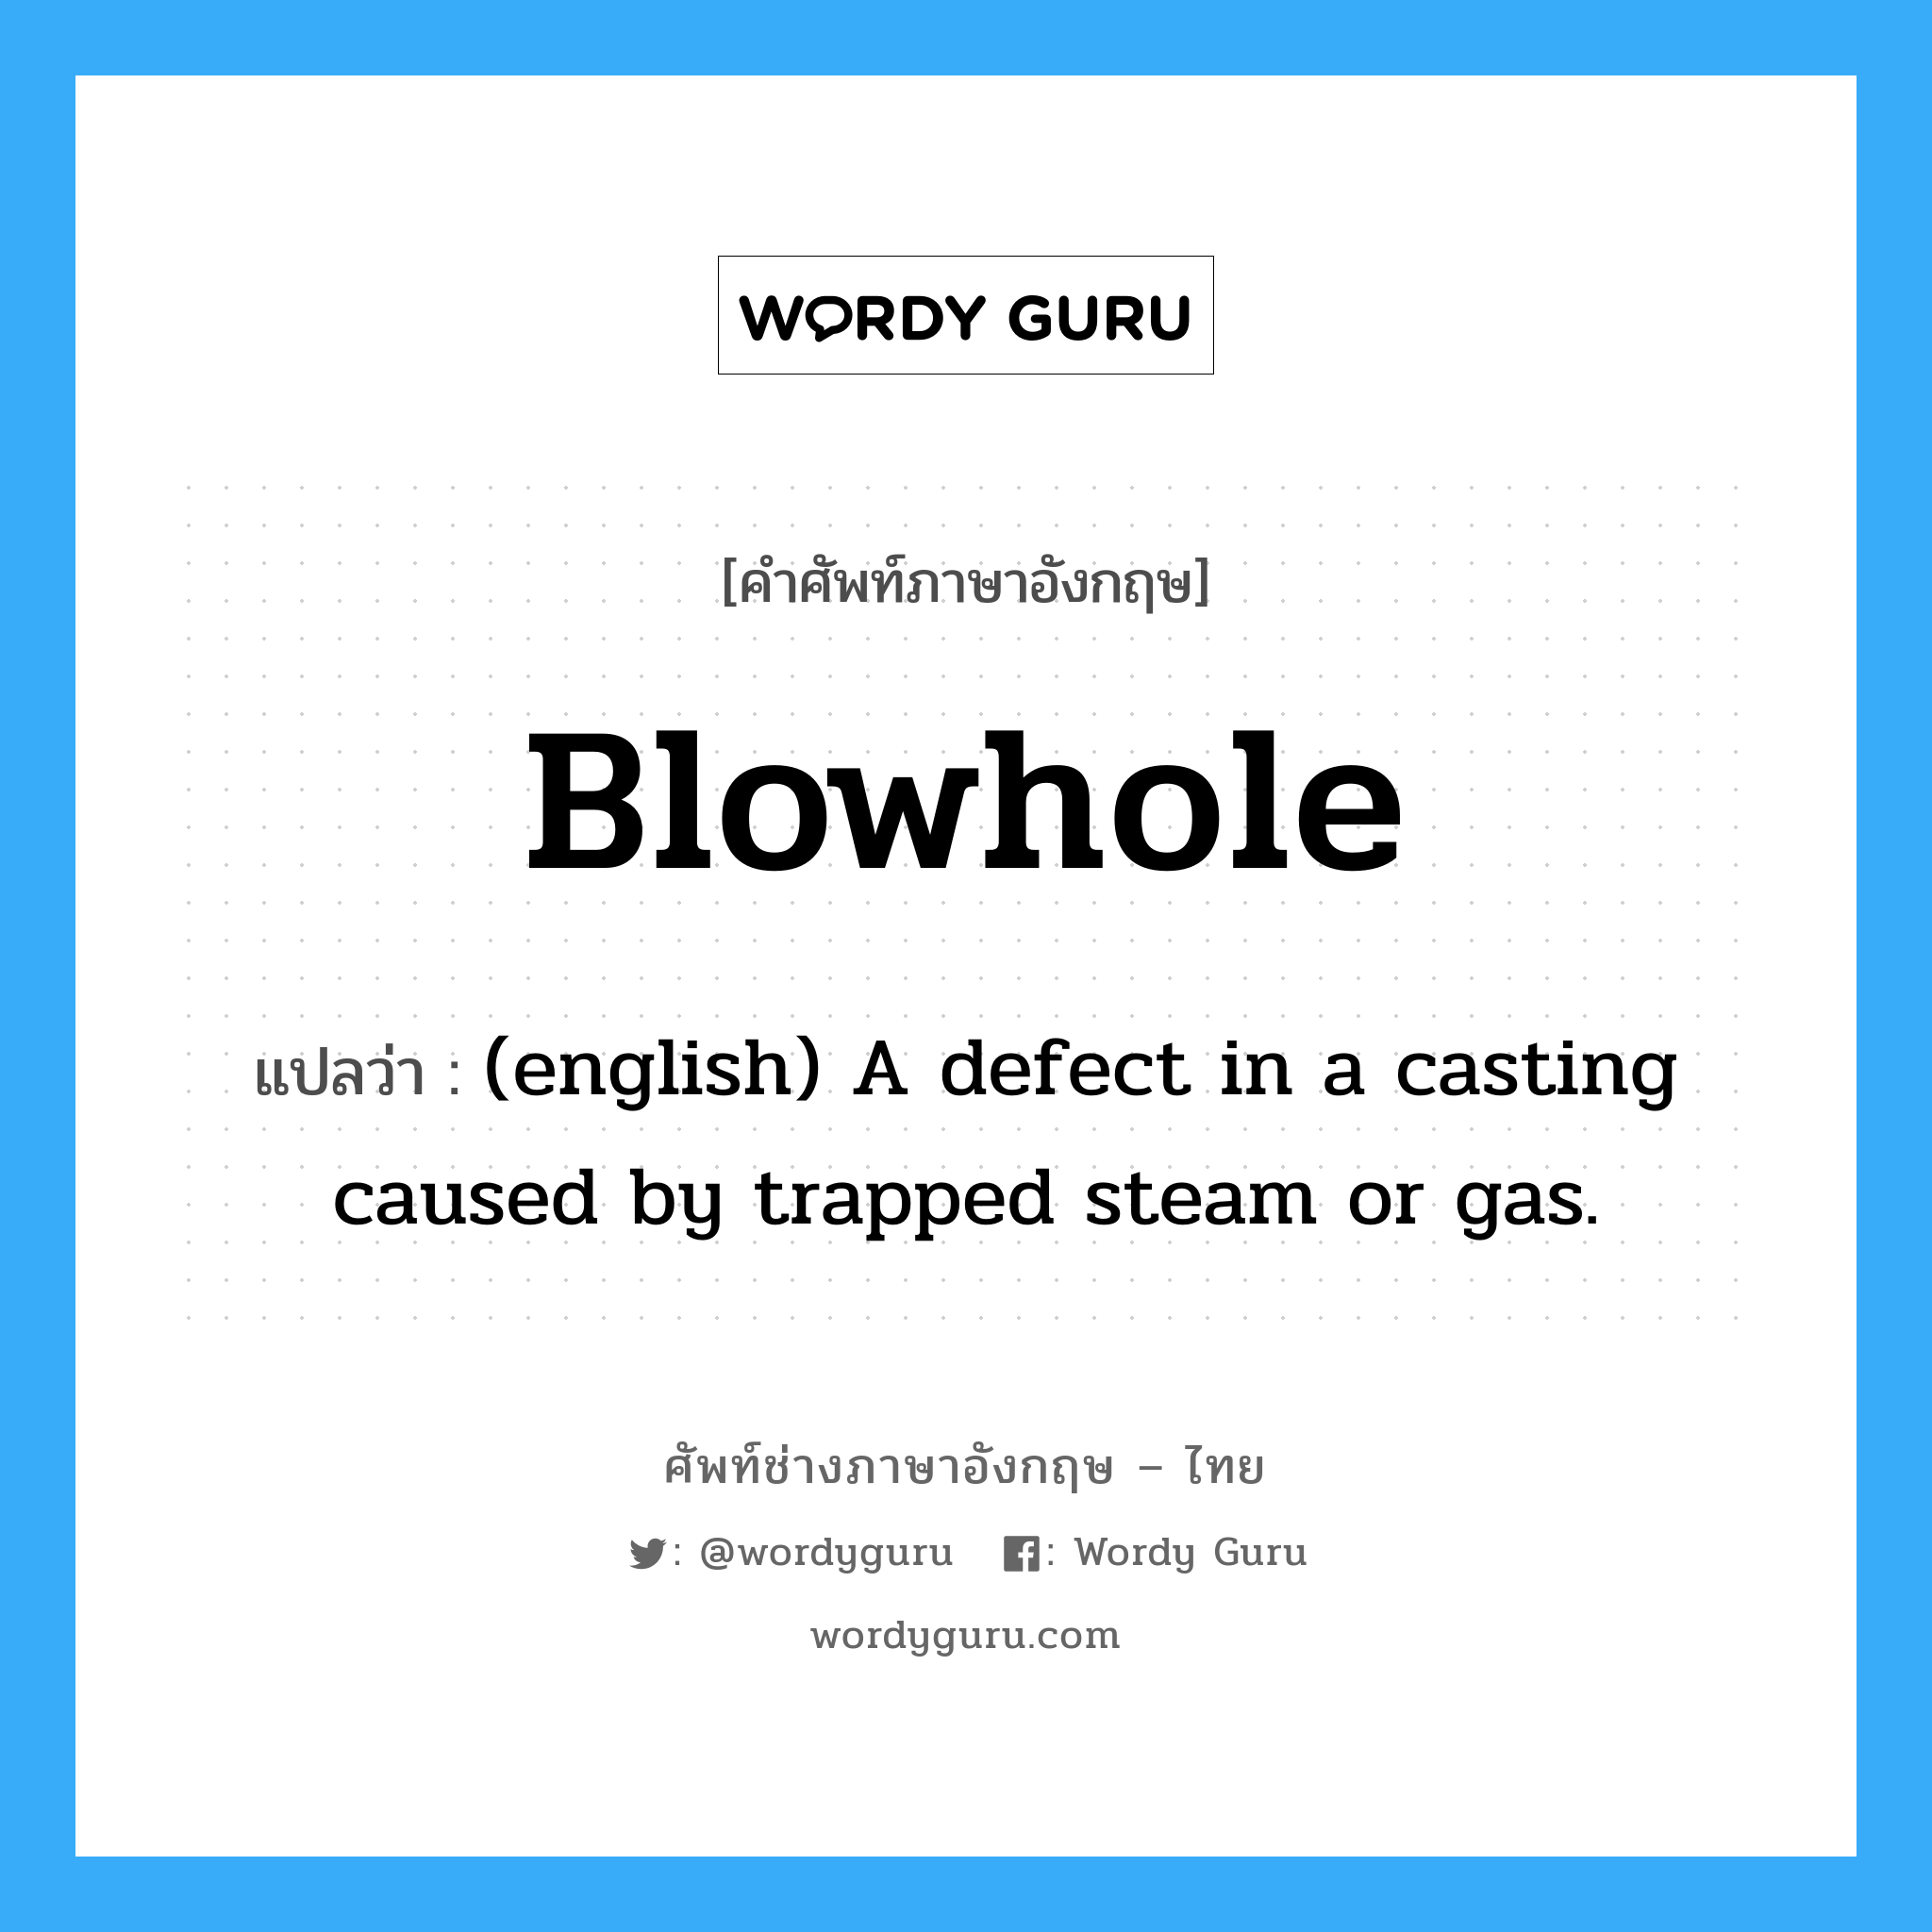 Blowhole แปลว่า?, คำศัพท์ช่างภาษาอังกฤษ - ไทย Blowhole คำศัพท์ภาษาอังกฤษ Blowhole แปลว่า (english) A defect in a casting caused by trapped steam or gas.